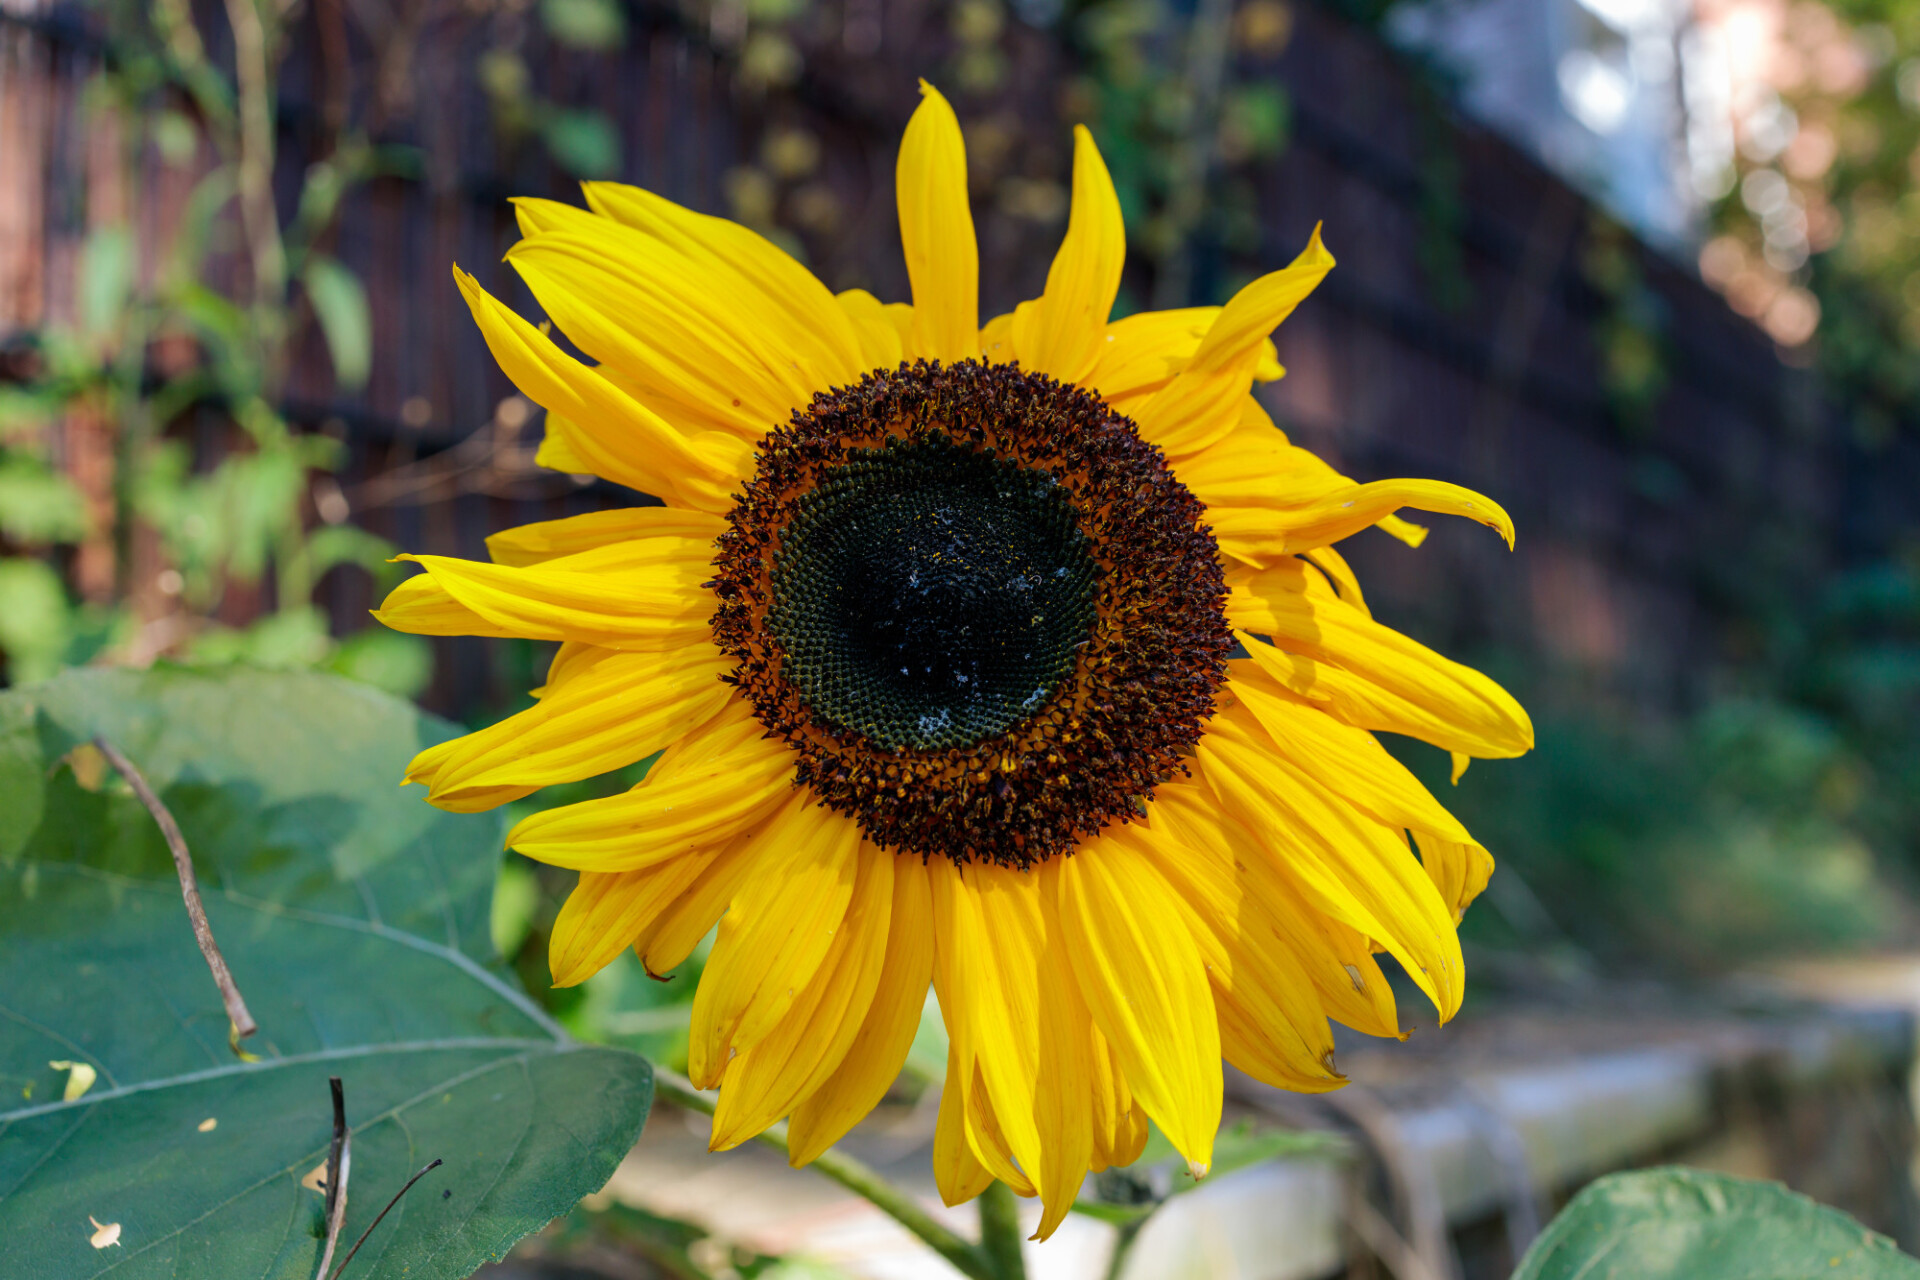 A sunflower at the roadside